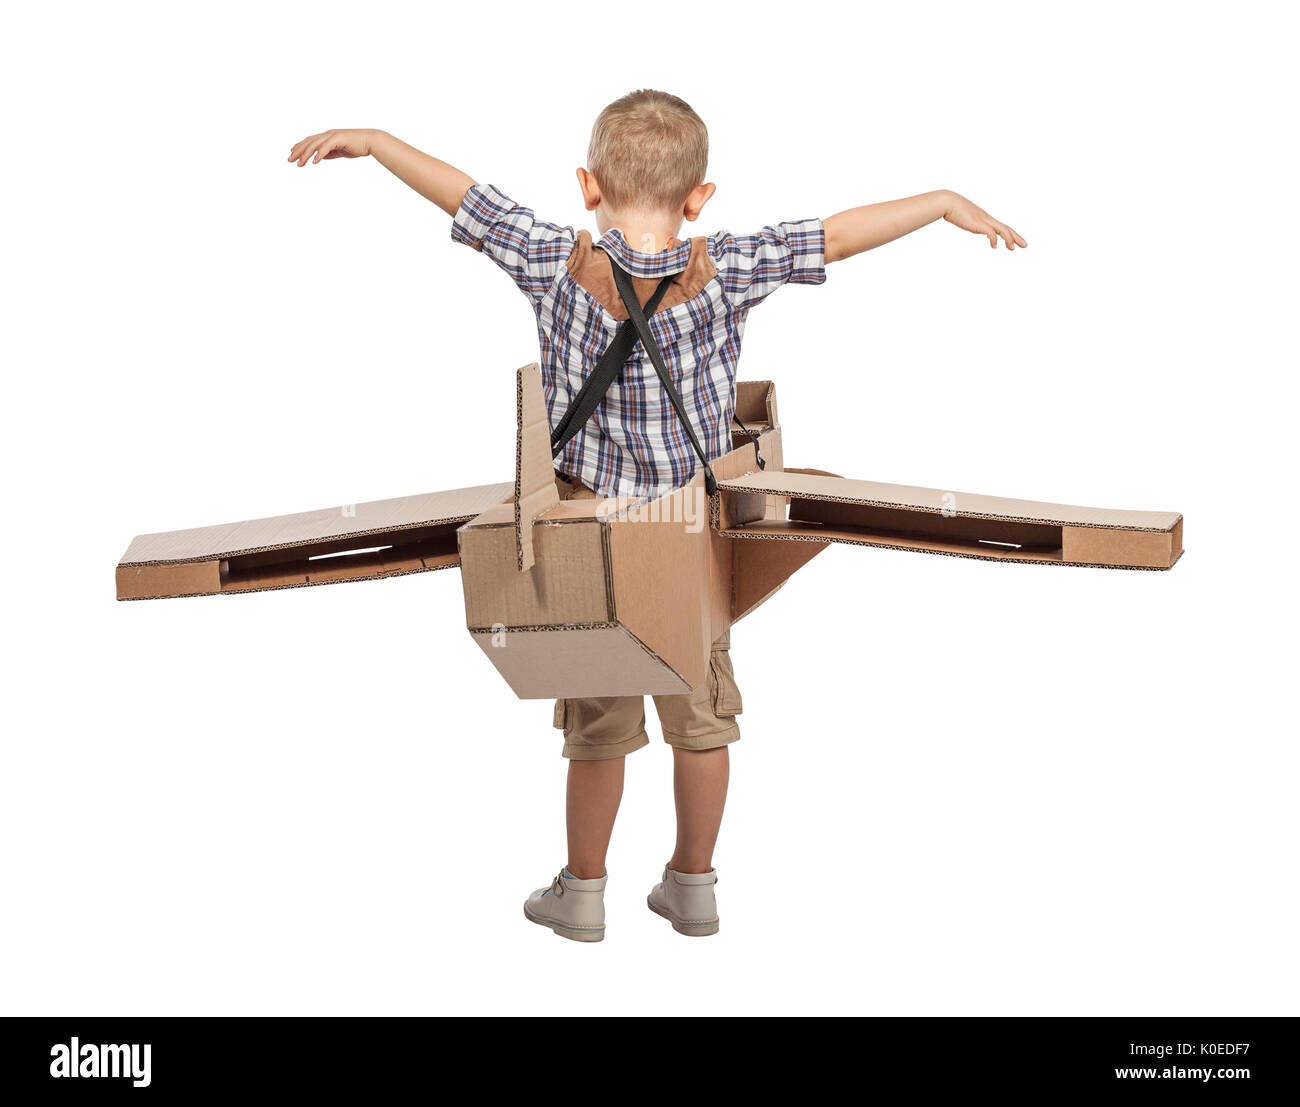 caucasian child play with cardboard airplane isolated on white background Stock Photo